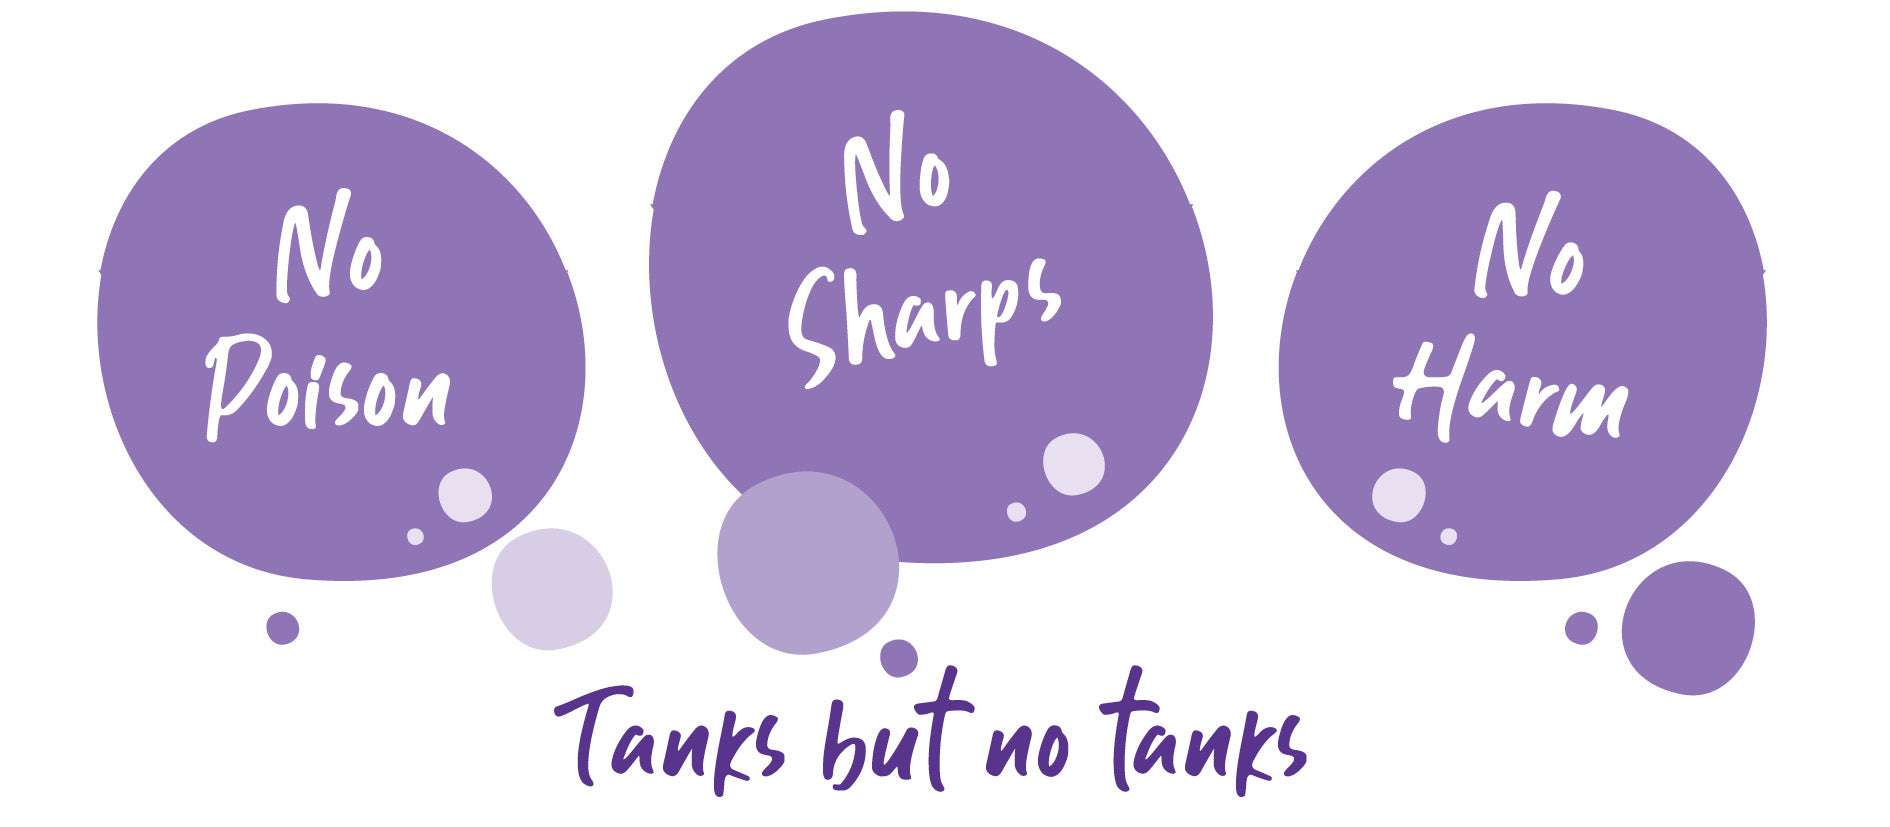 purple vector bubbles saying "no poison" "no sharps" and "no harm"